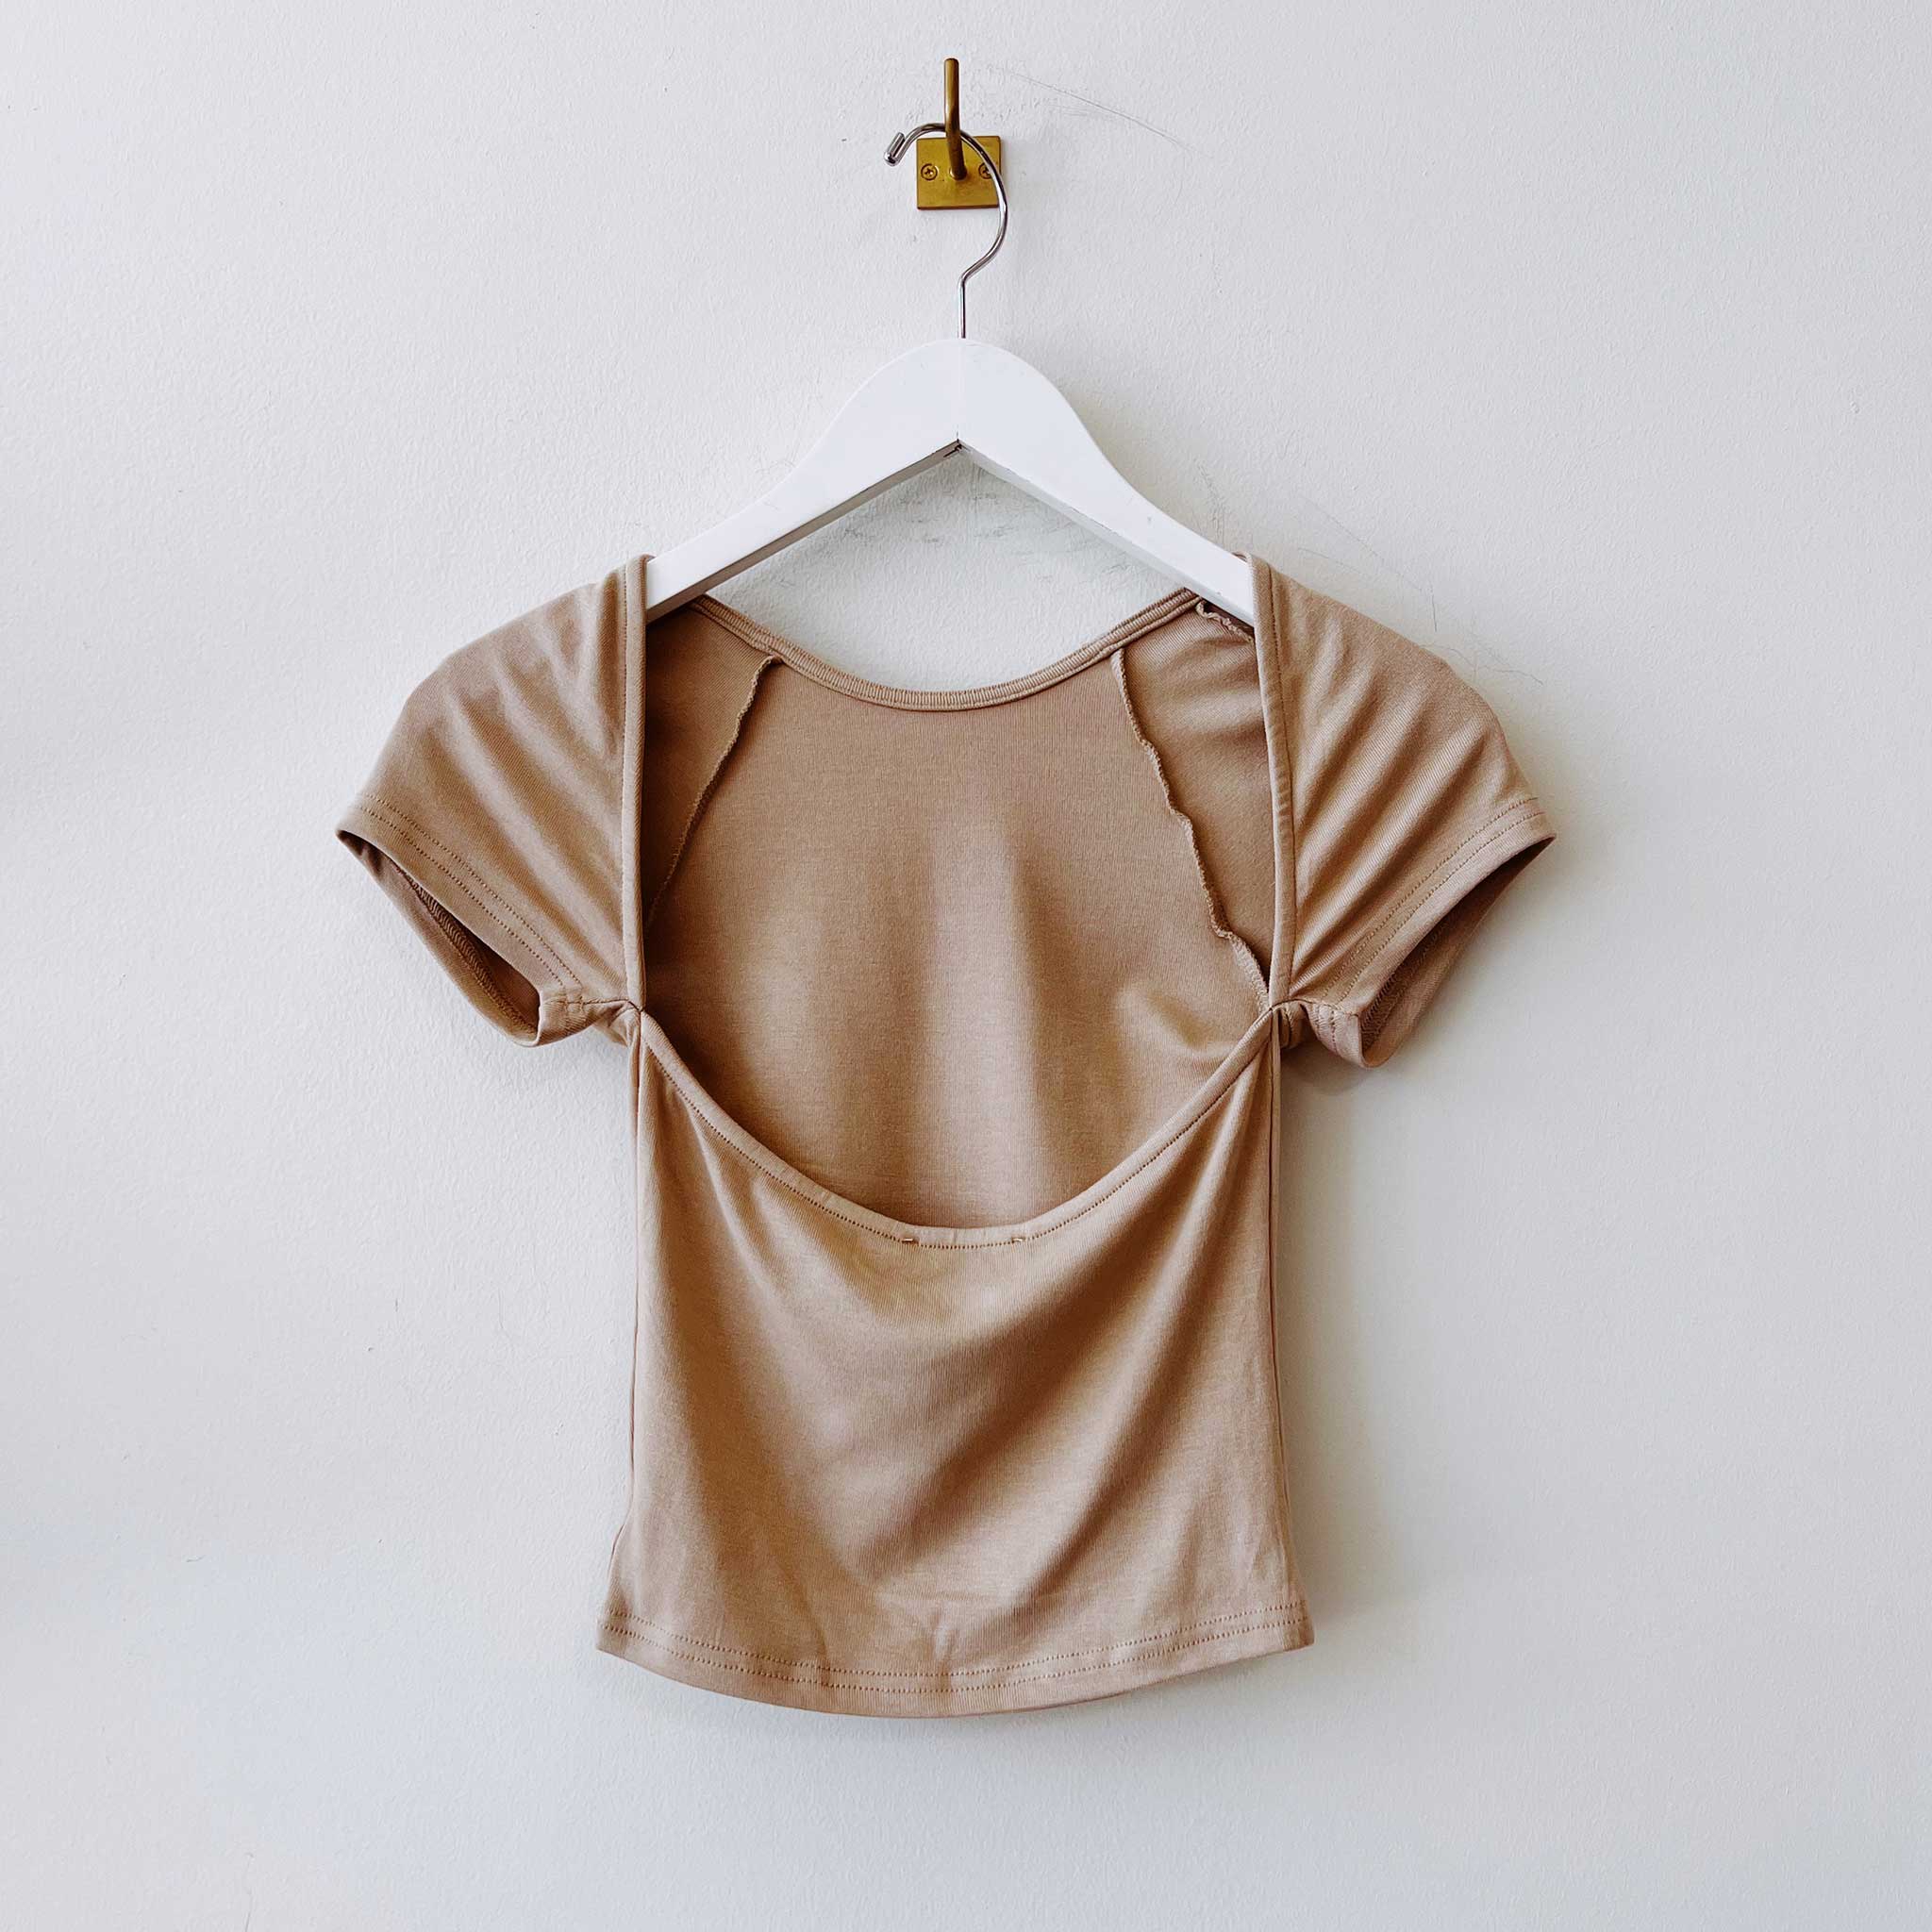 Back detail of the Ribbed Low Back Tee - Latte.